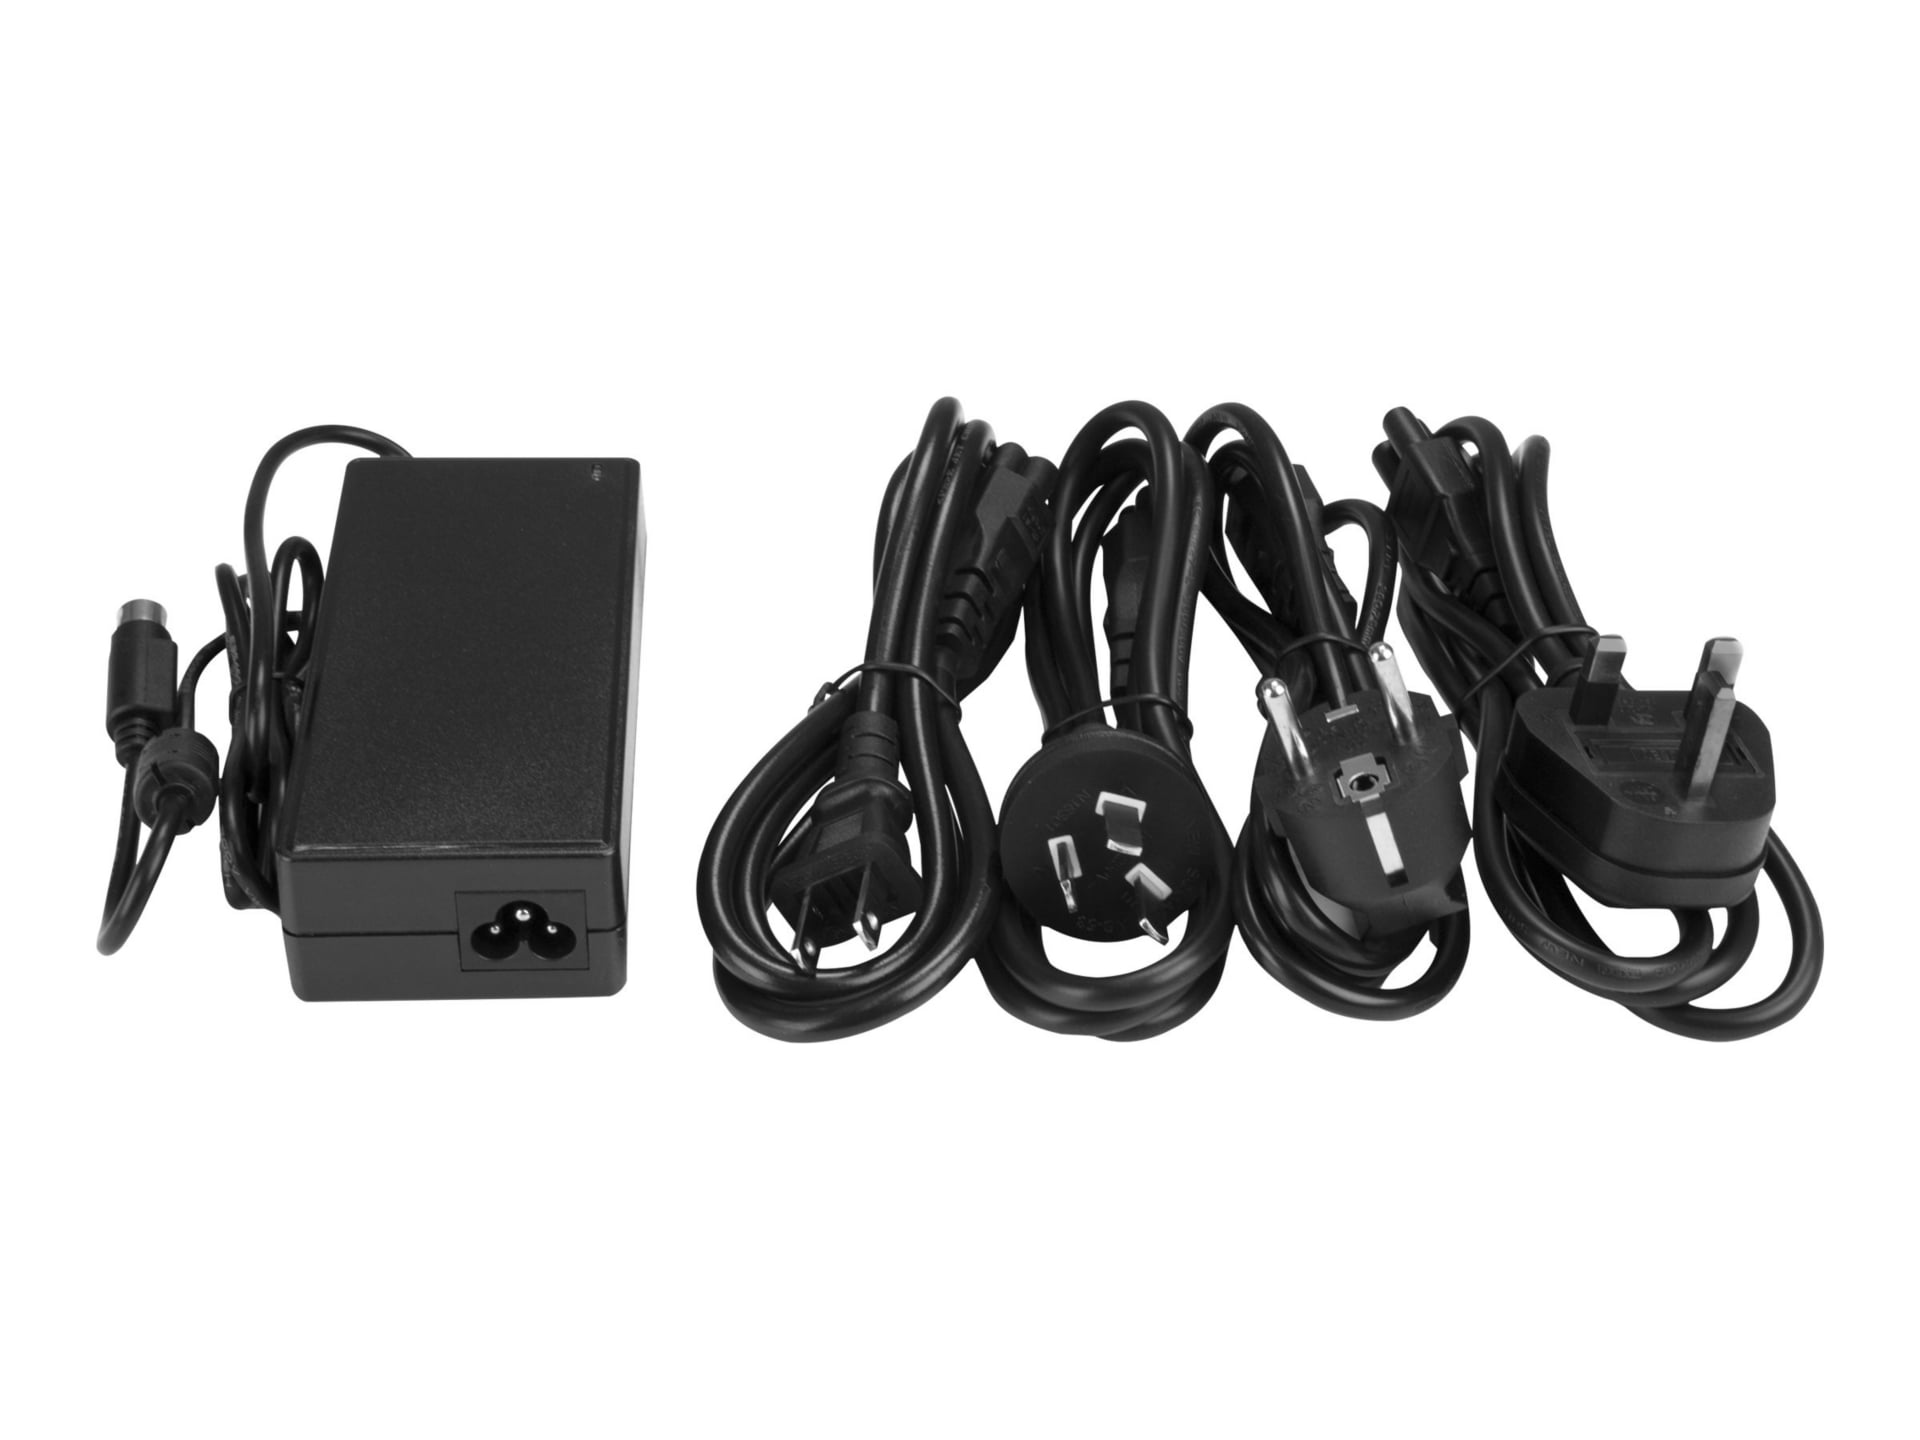 StarTech.com Replacement 12V DC Power Adapter - 12 Volts,6.5 Amps